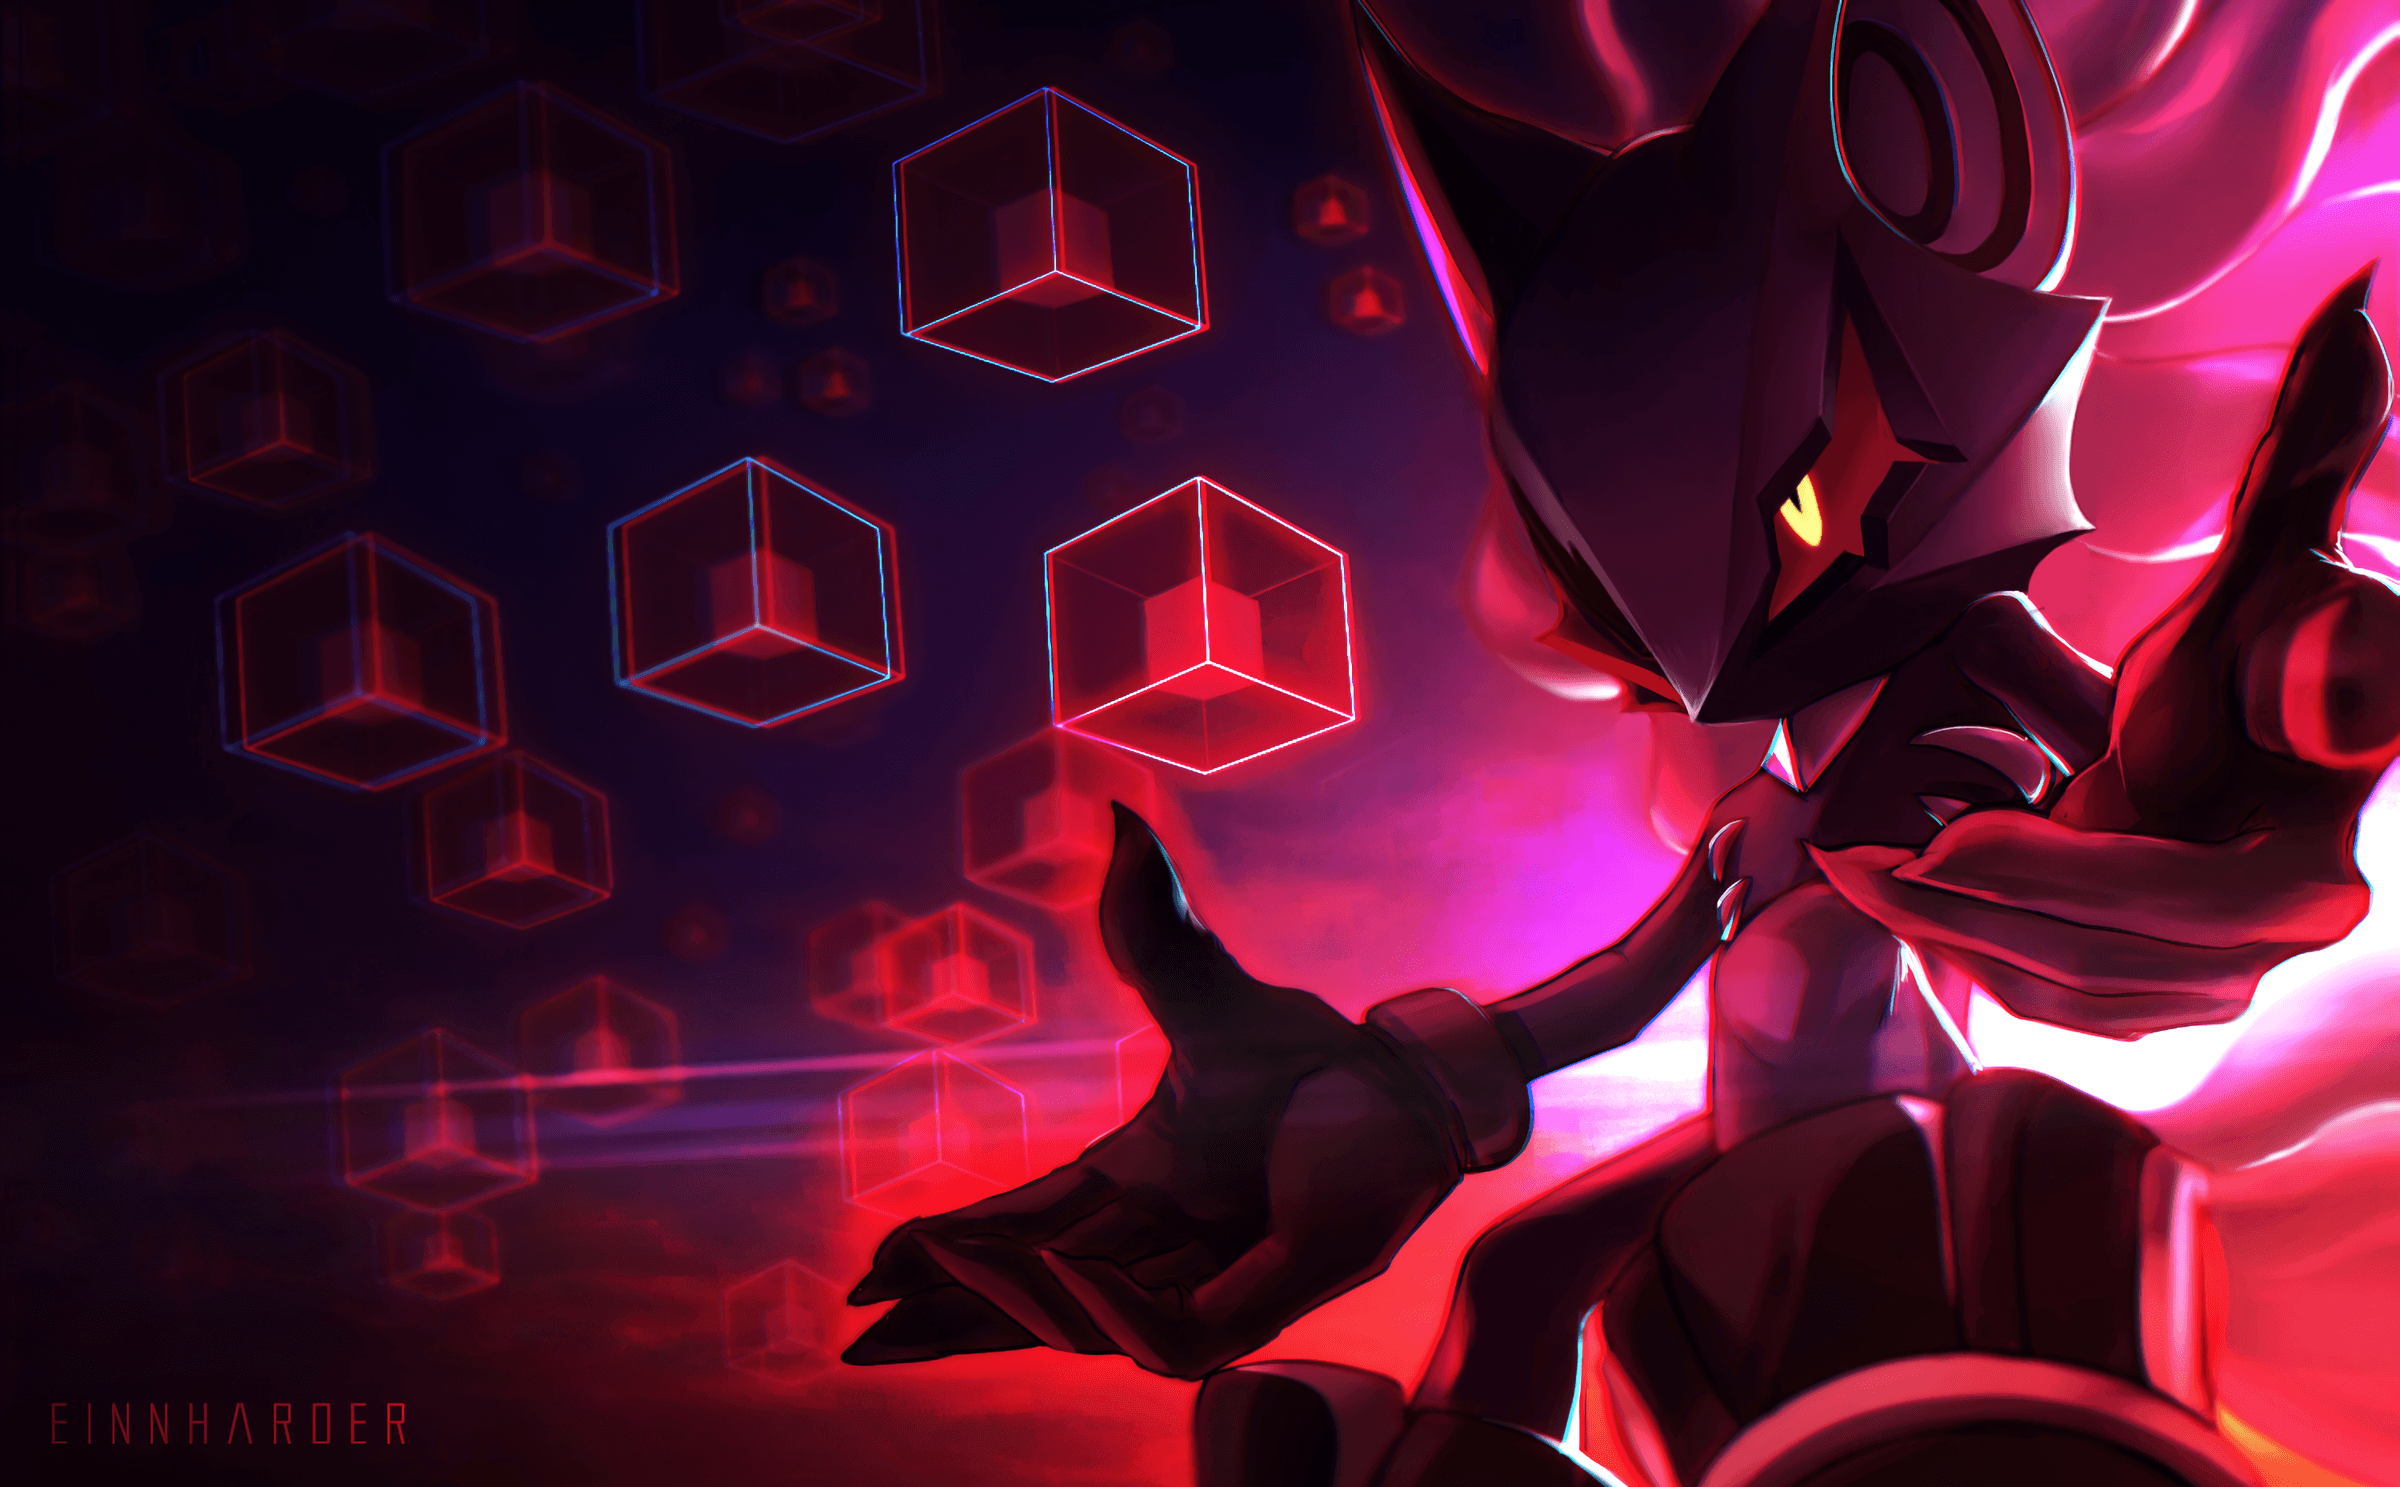 Sonic Forces HD Wallpaper and Background Image